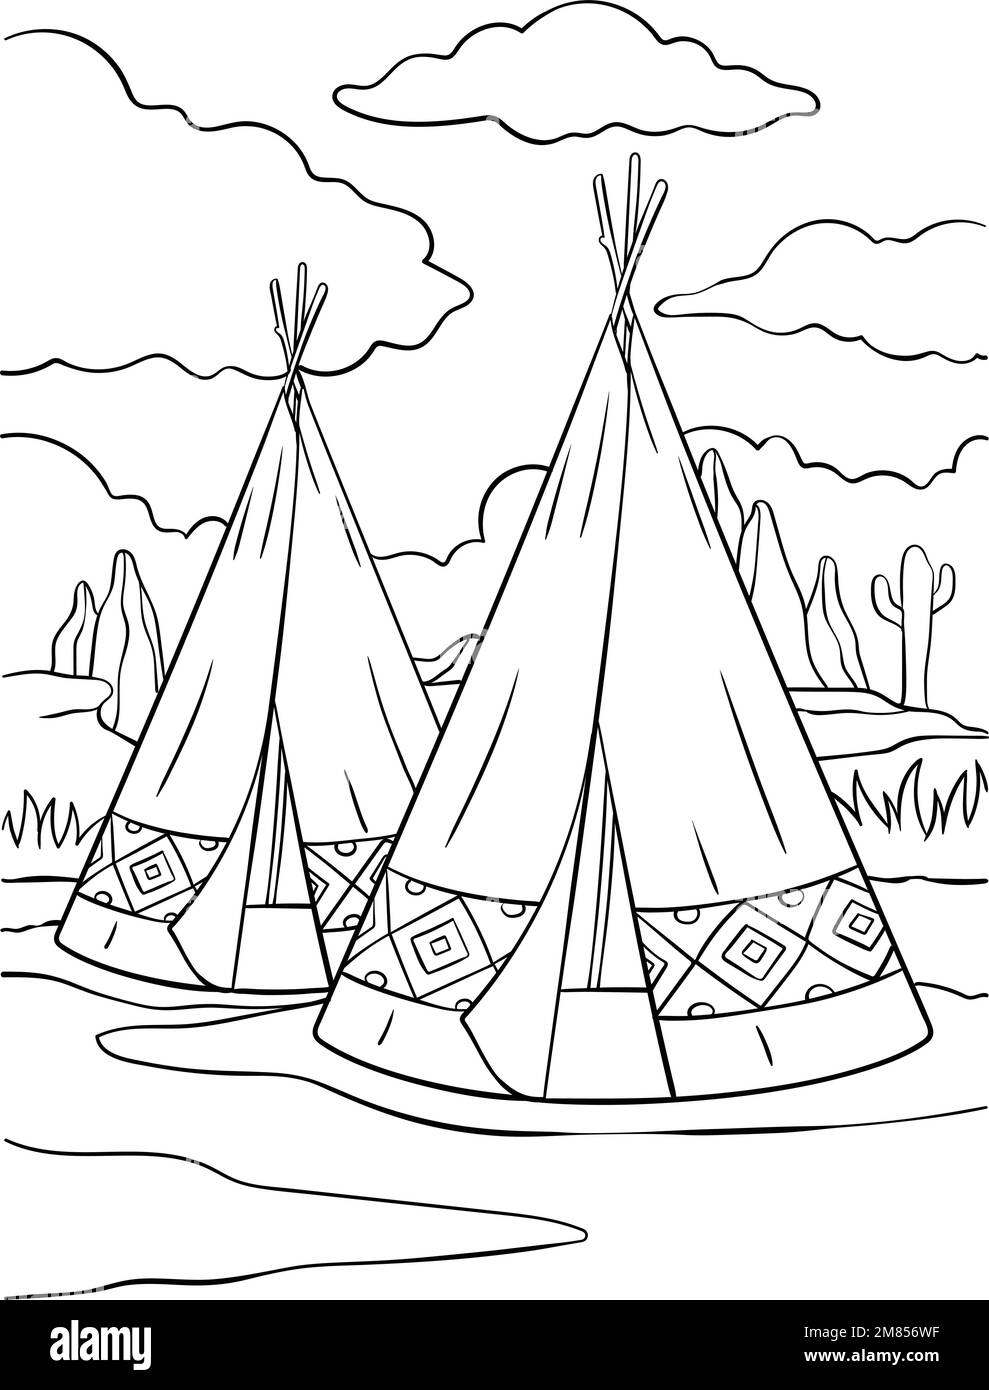 Native American Indian Tepee Coloring Page  Stock Vector